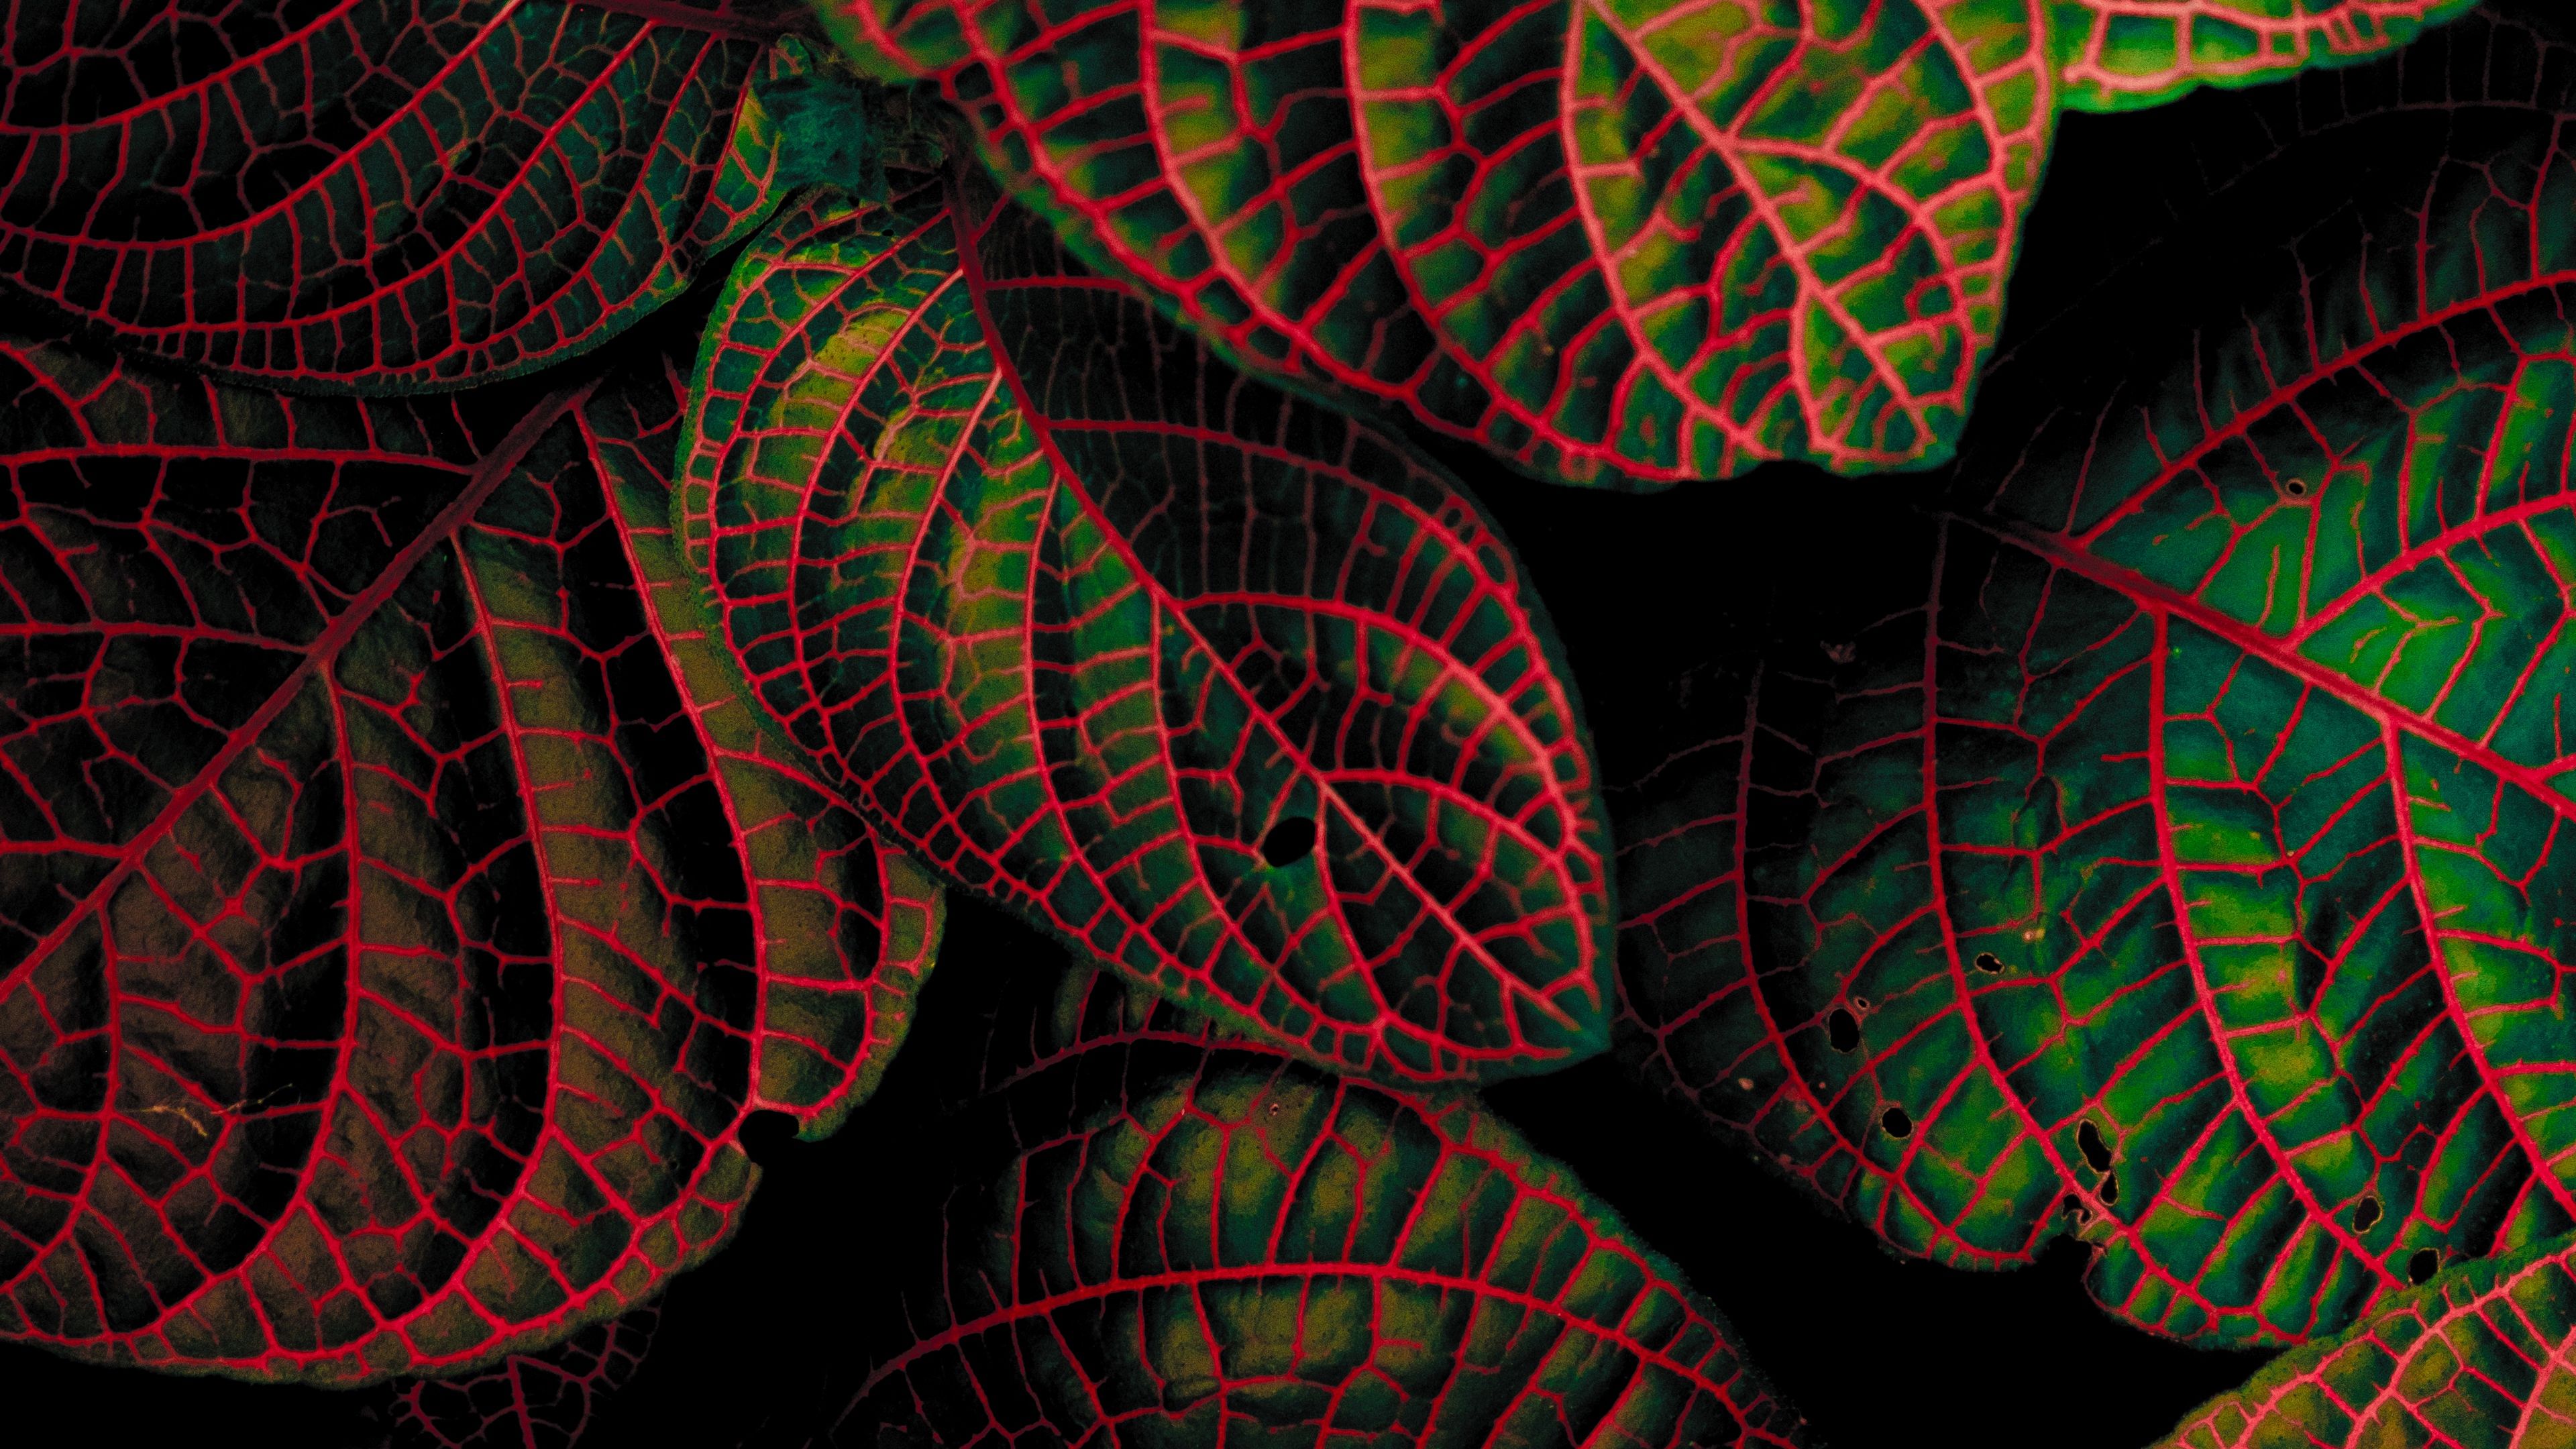 Download wallpaper 3840x2400 leaves, green, bushes, carved, dark, plant 4k  ultra hd 16:10 hd background